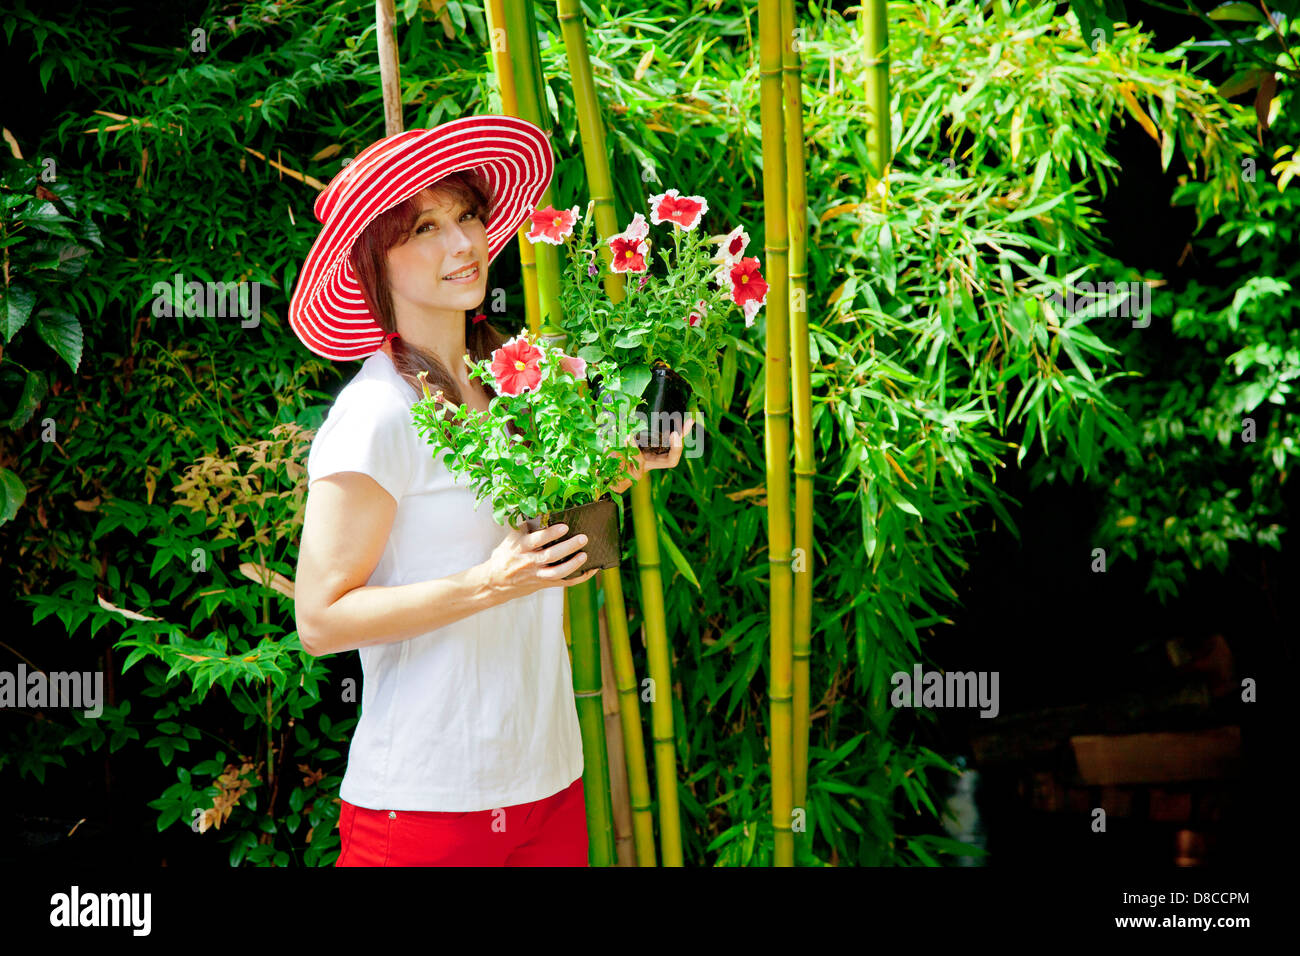 Woman holding plants outdoors Banque D'Images